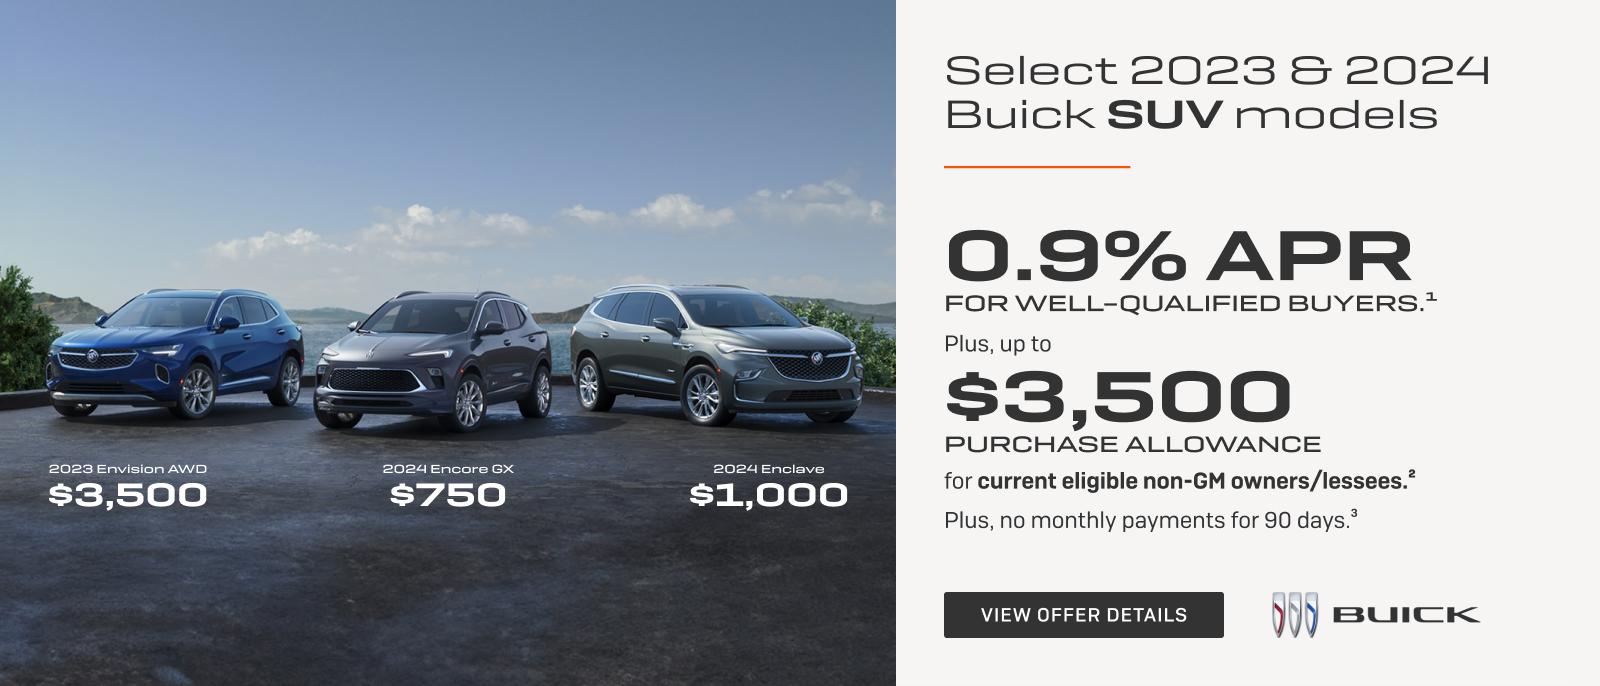 0.9% APR
FOR WELL-QUALIFIED BUYERS.1

Plus, up to $3,500 PURCHASE ALLOWANCE for current eligible non-GM owners/lessees.2

Plus, no monthly payments for 90 days.3